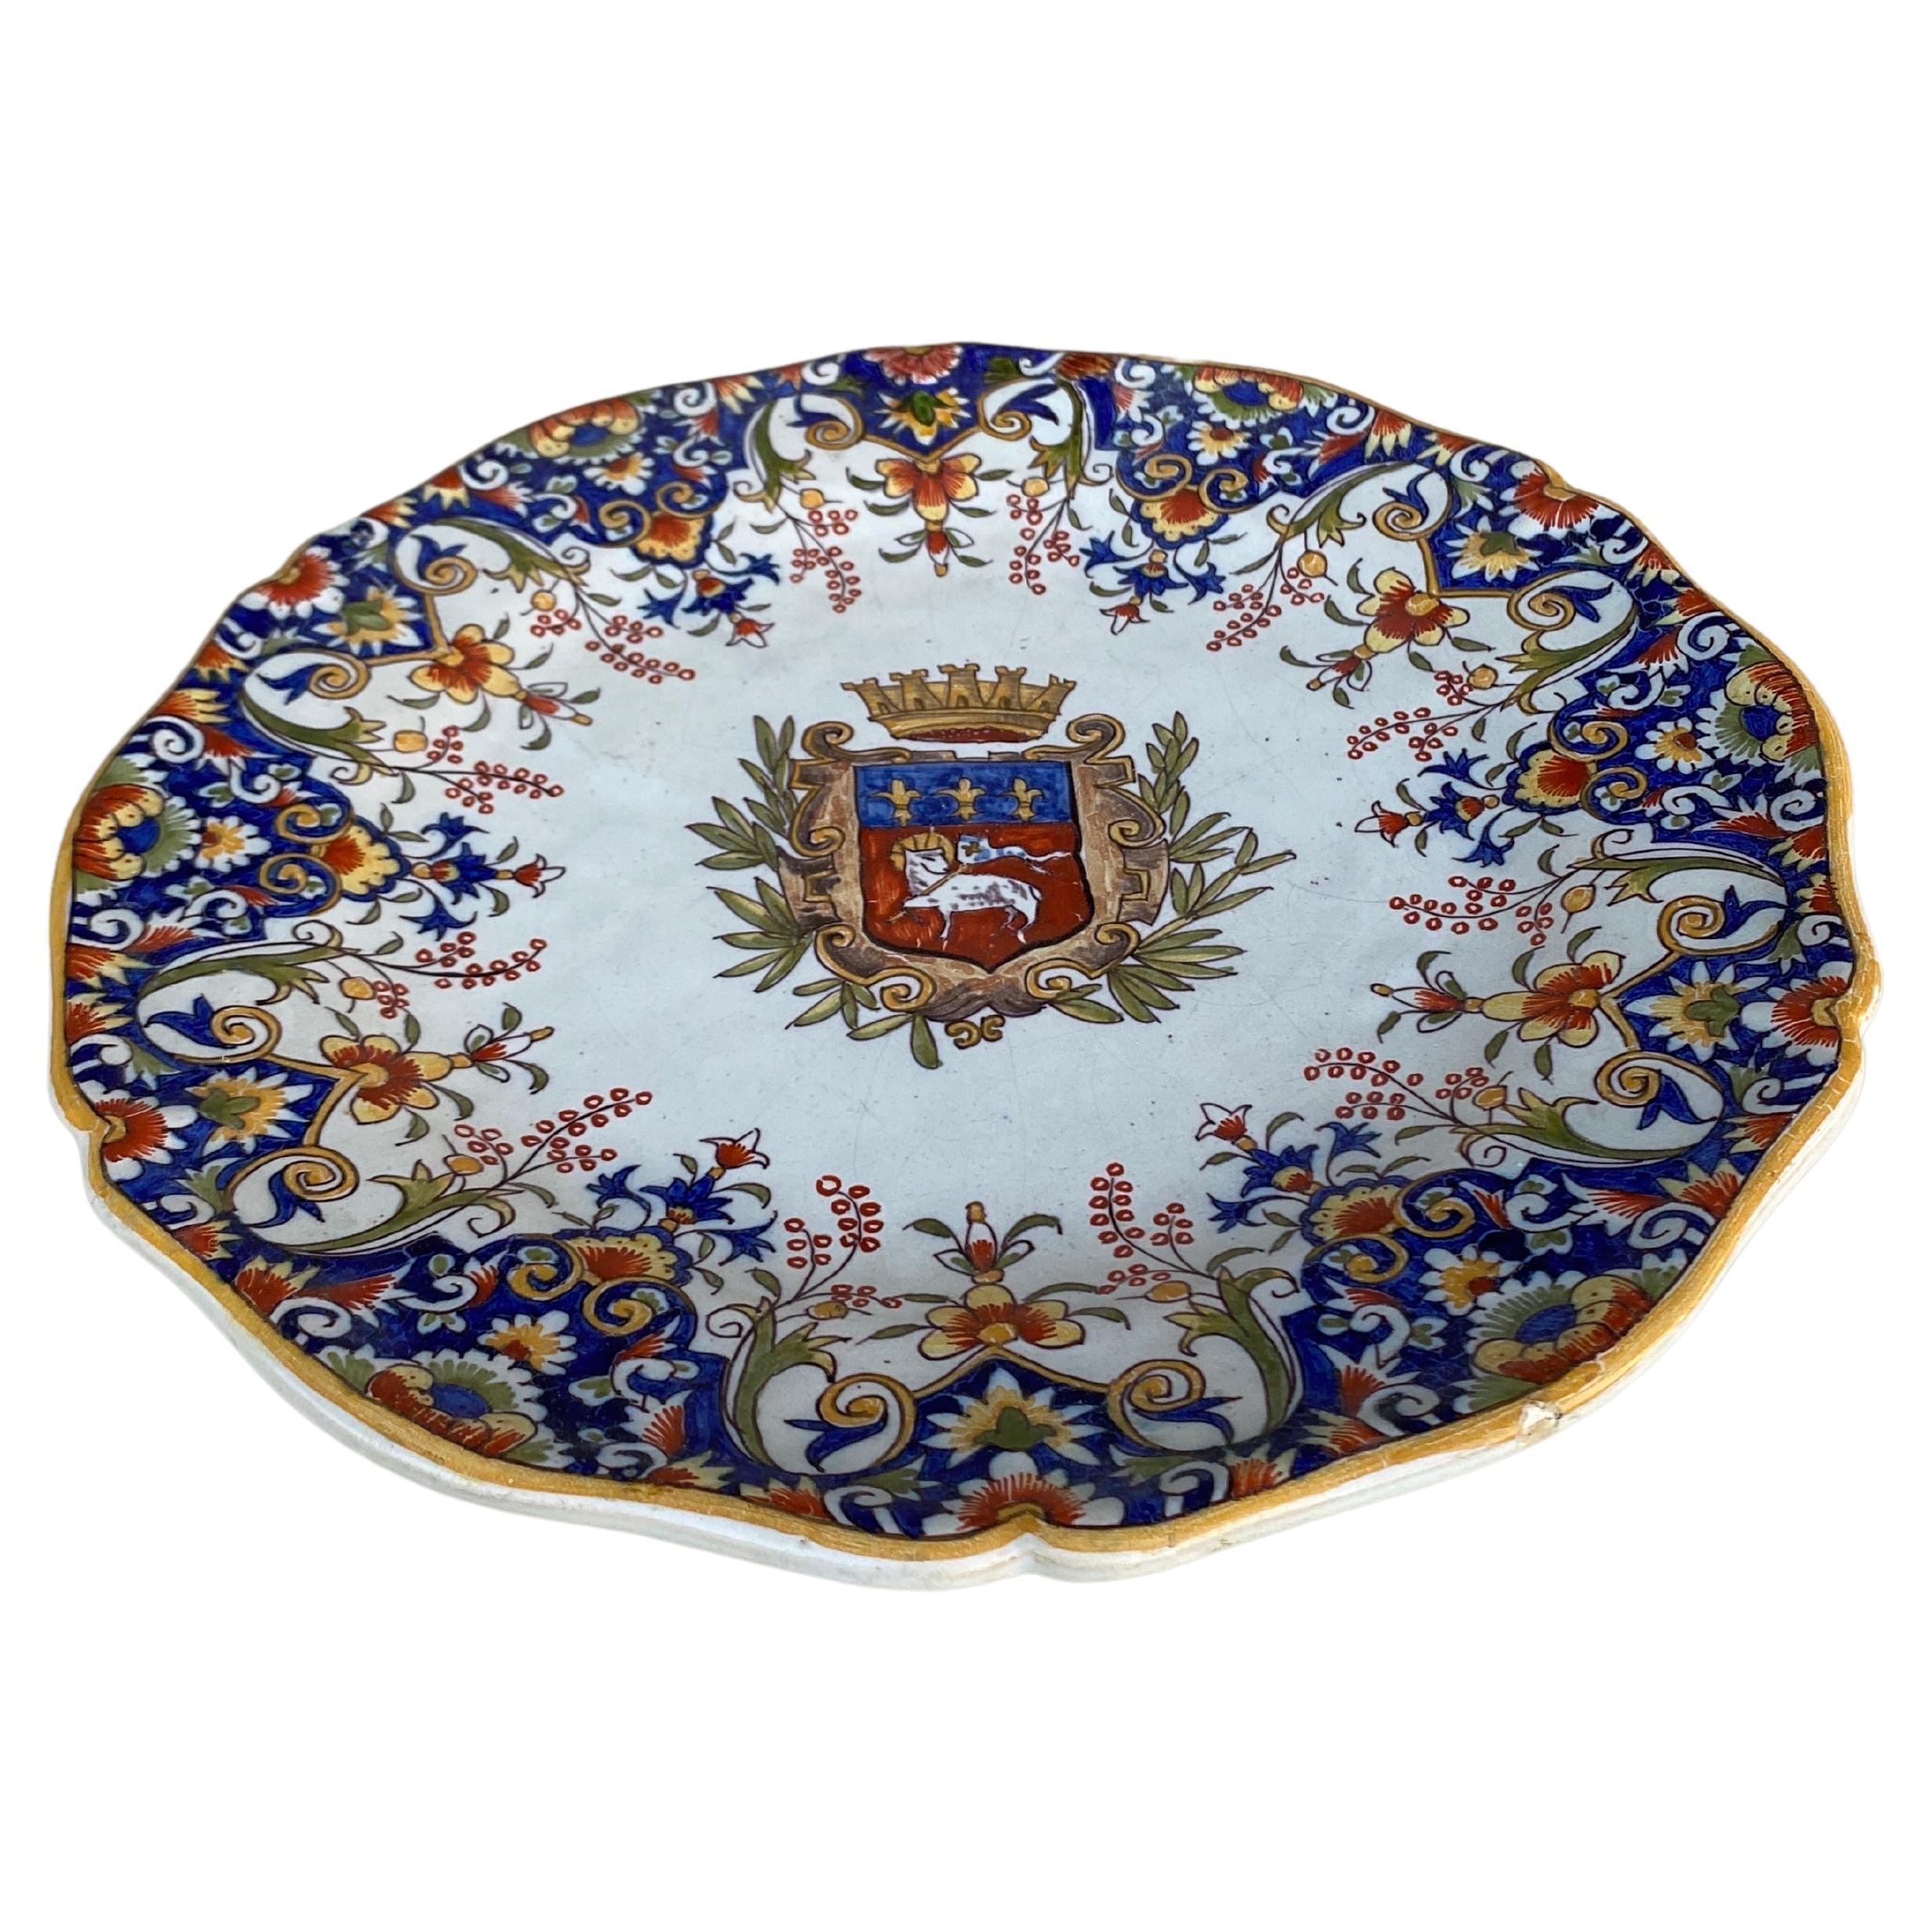 19th Century large French Faience platter with Armoiries Desvres marked Rouen.
12 inches diameter.